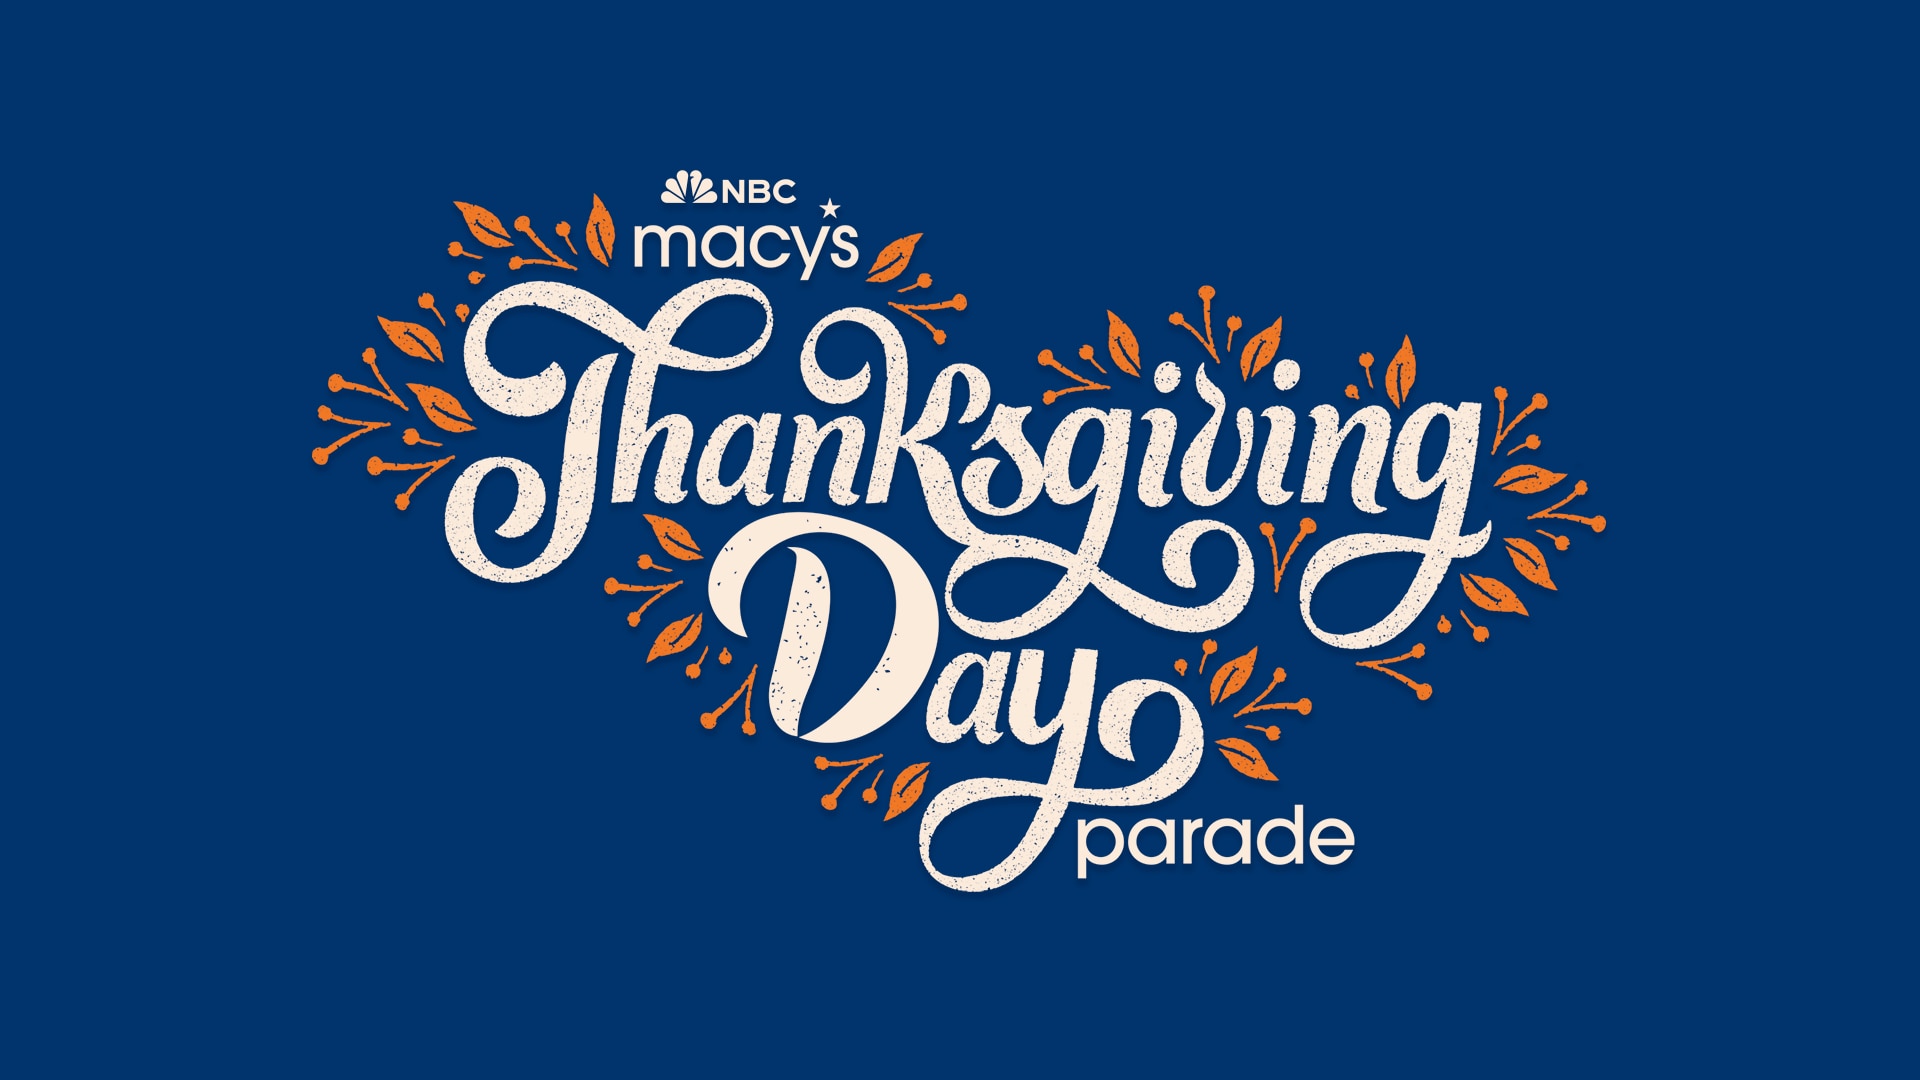 The 96th Annual Macy's Thanksgiving Day Parade